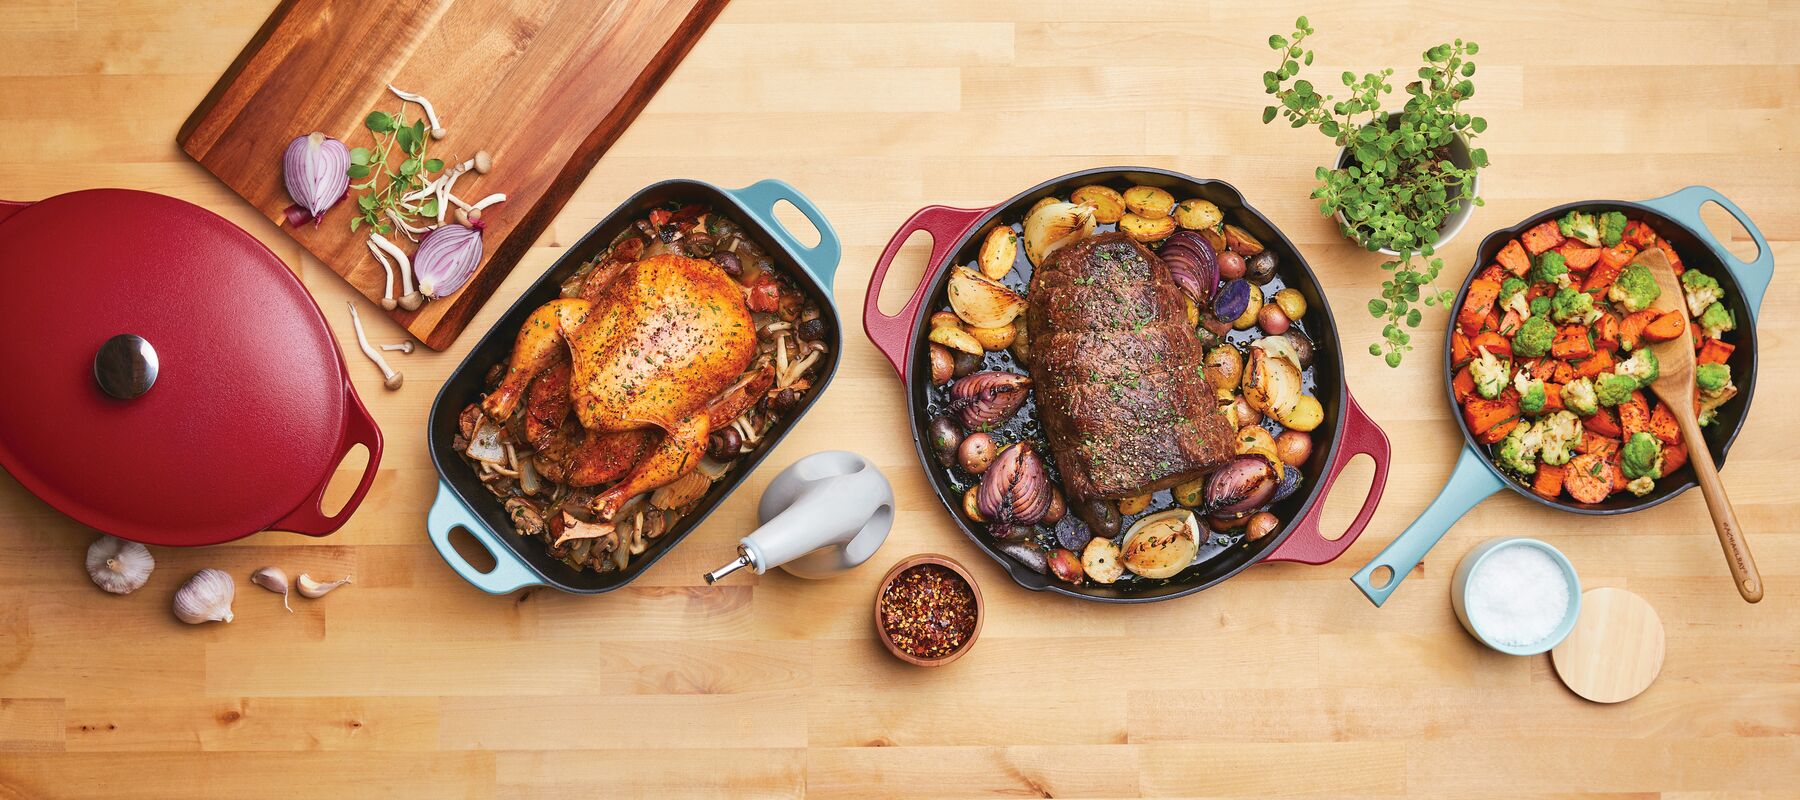 NITRO Cast Iron Collection Family Shot Styled With Food